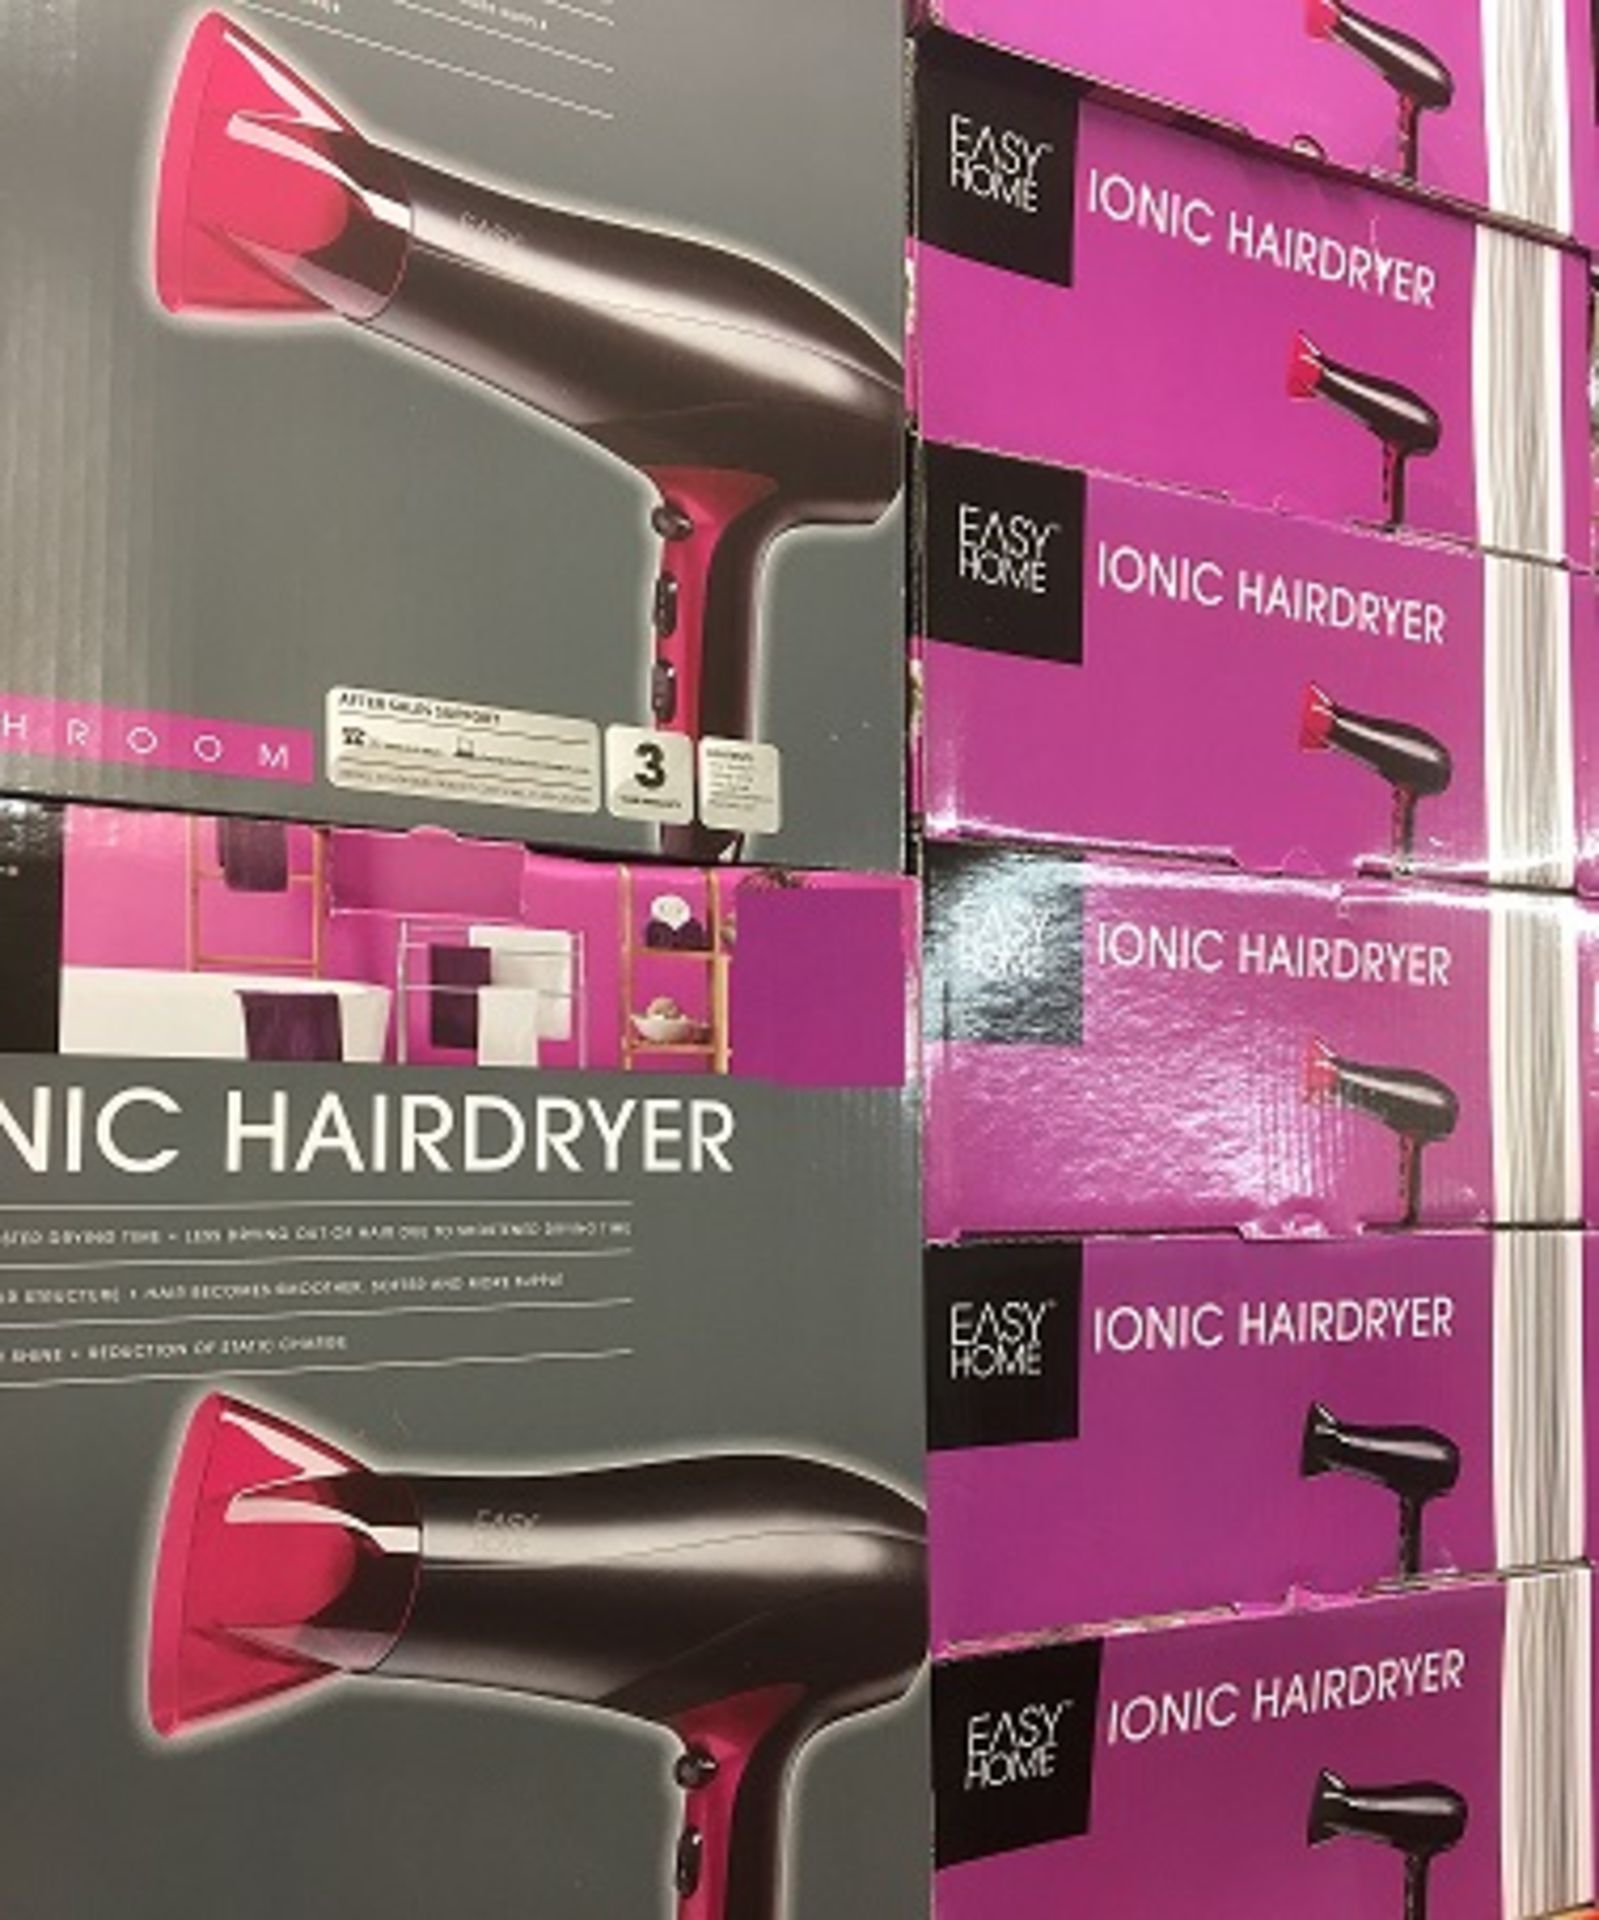 V Brand New Easy Home Ionic Hairdryer-Faster Drying-Revival Of The Hair Structure (item is similar - Image 2 of 2